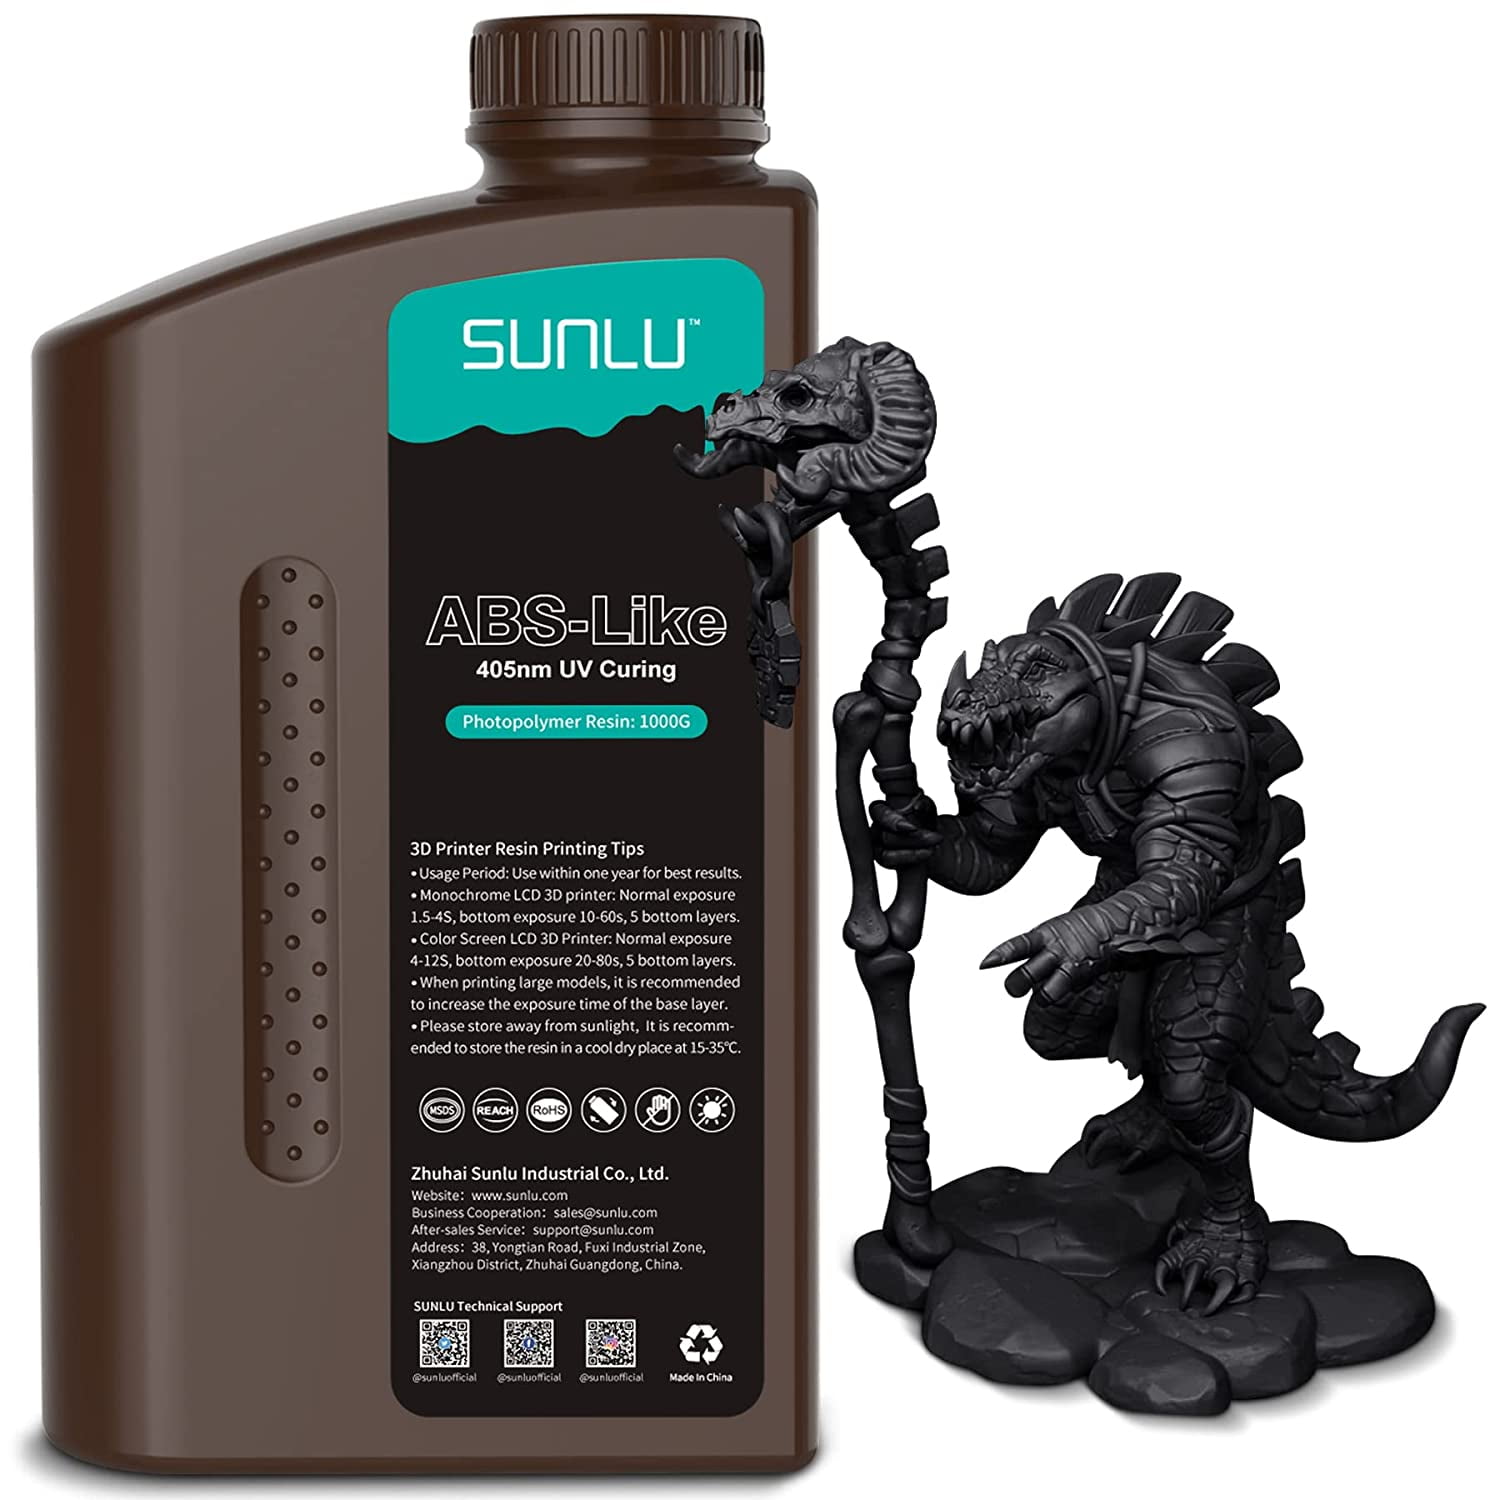 SUNLU 1KG ABS-Like 3D Printer Resin, Fast Curing Strong 405nm Photopolymer  Resin for LCD/DLP/SLA 3D Printer, Non Brittle, High Precision, Low